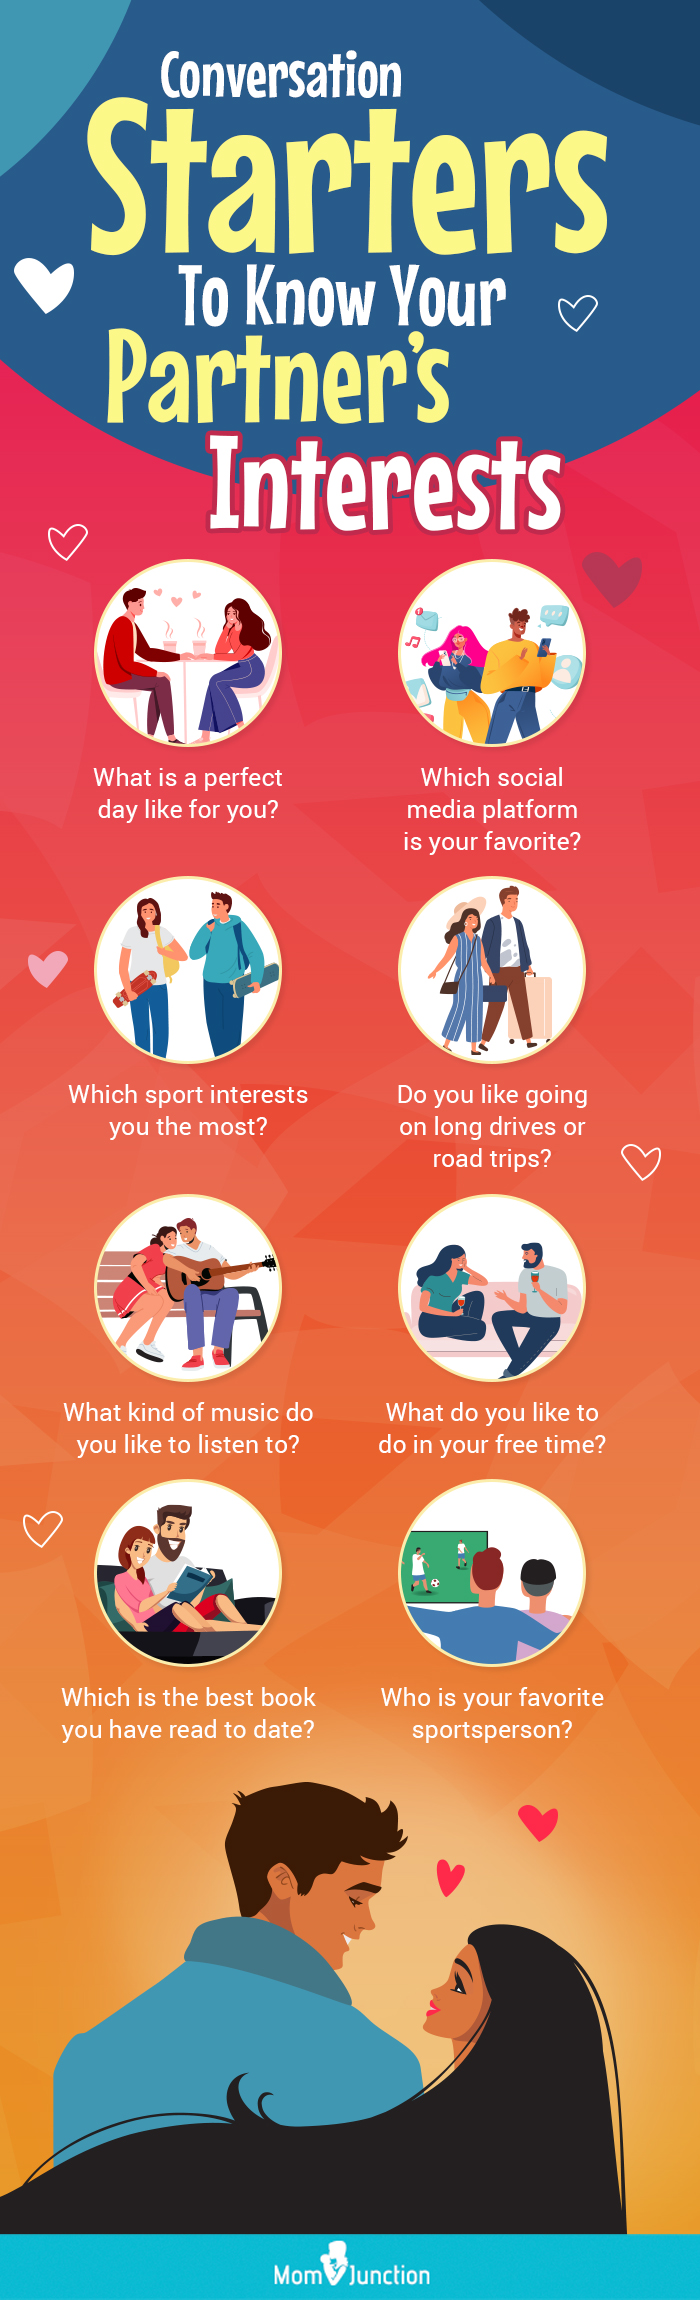 partner's interests and hobbies (infographic)